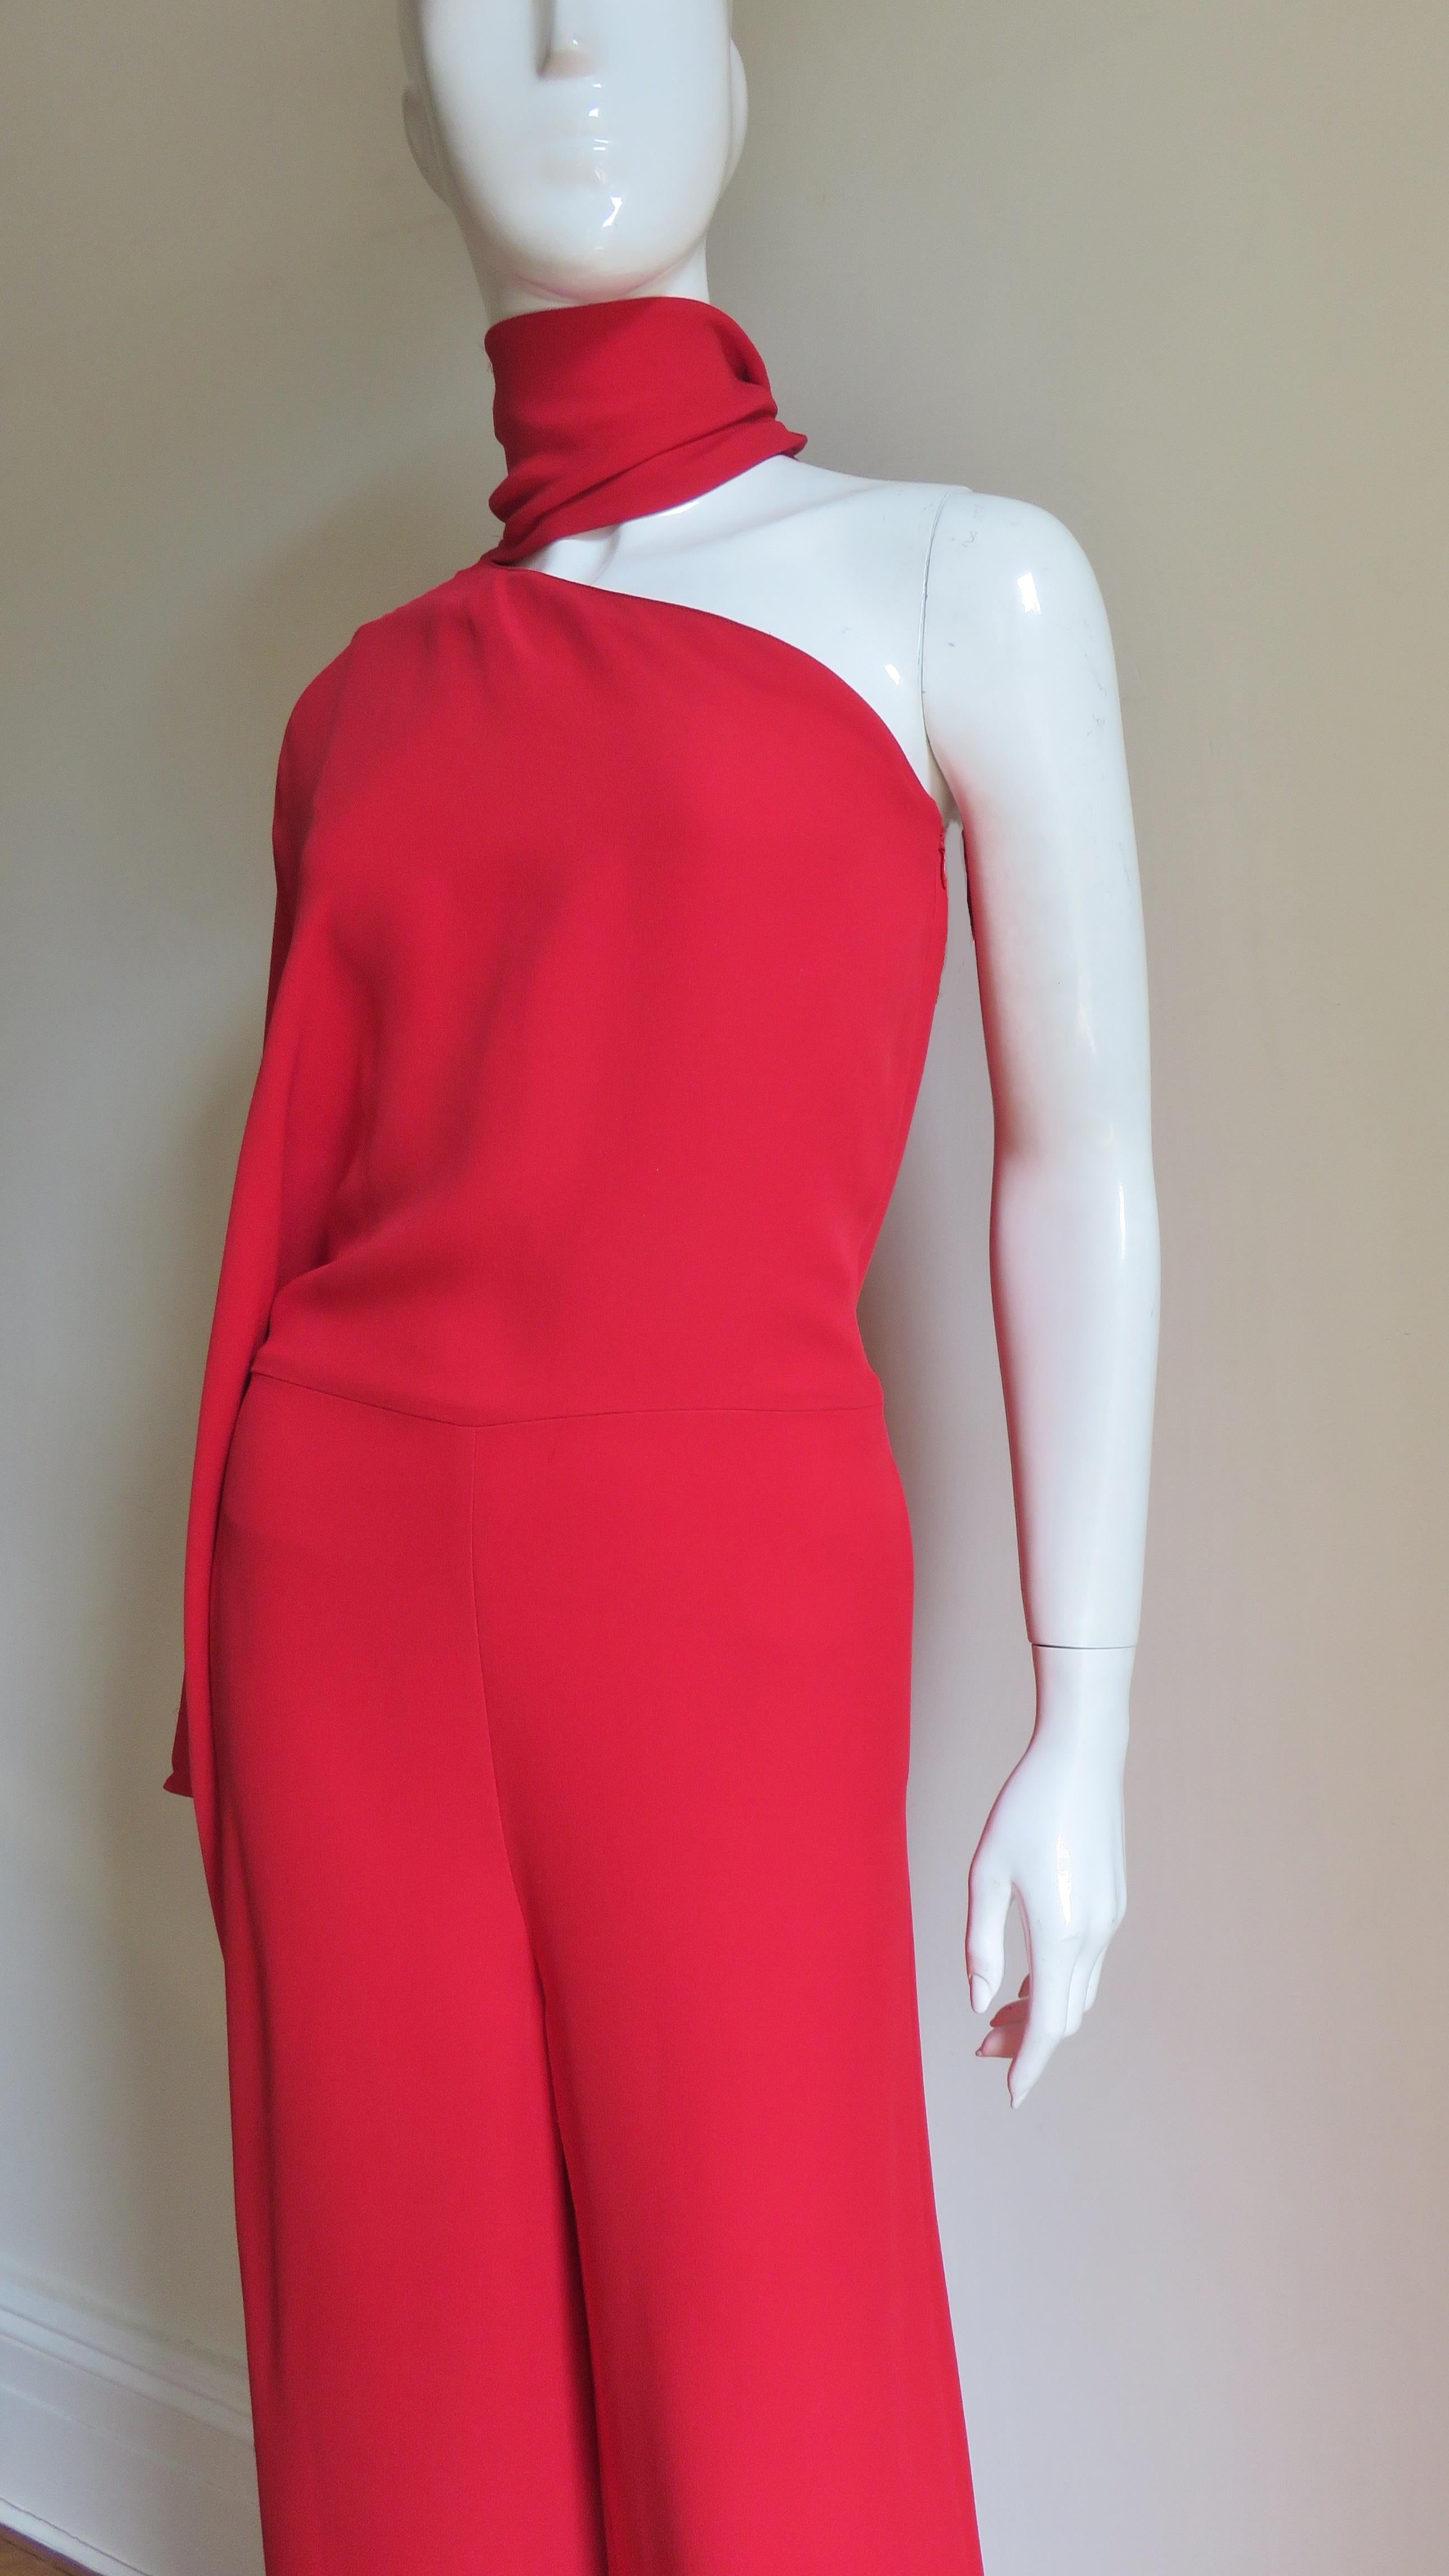 An incredible red silk jumpsuit from Valentino.  It has one kimono sleeve, a tie at the neck which can be worn a number of ways and wide pant legs. The jumpsuit has an invisible side zipper, side seam pockets at the hips, and the top portion is